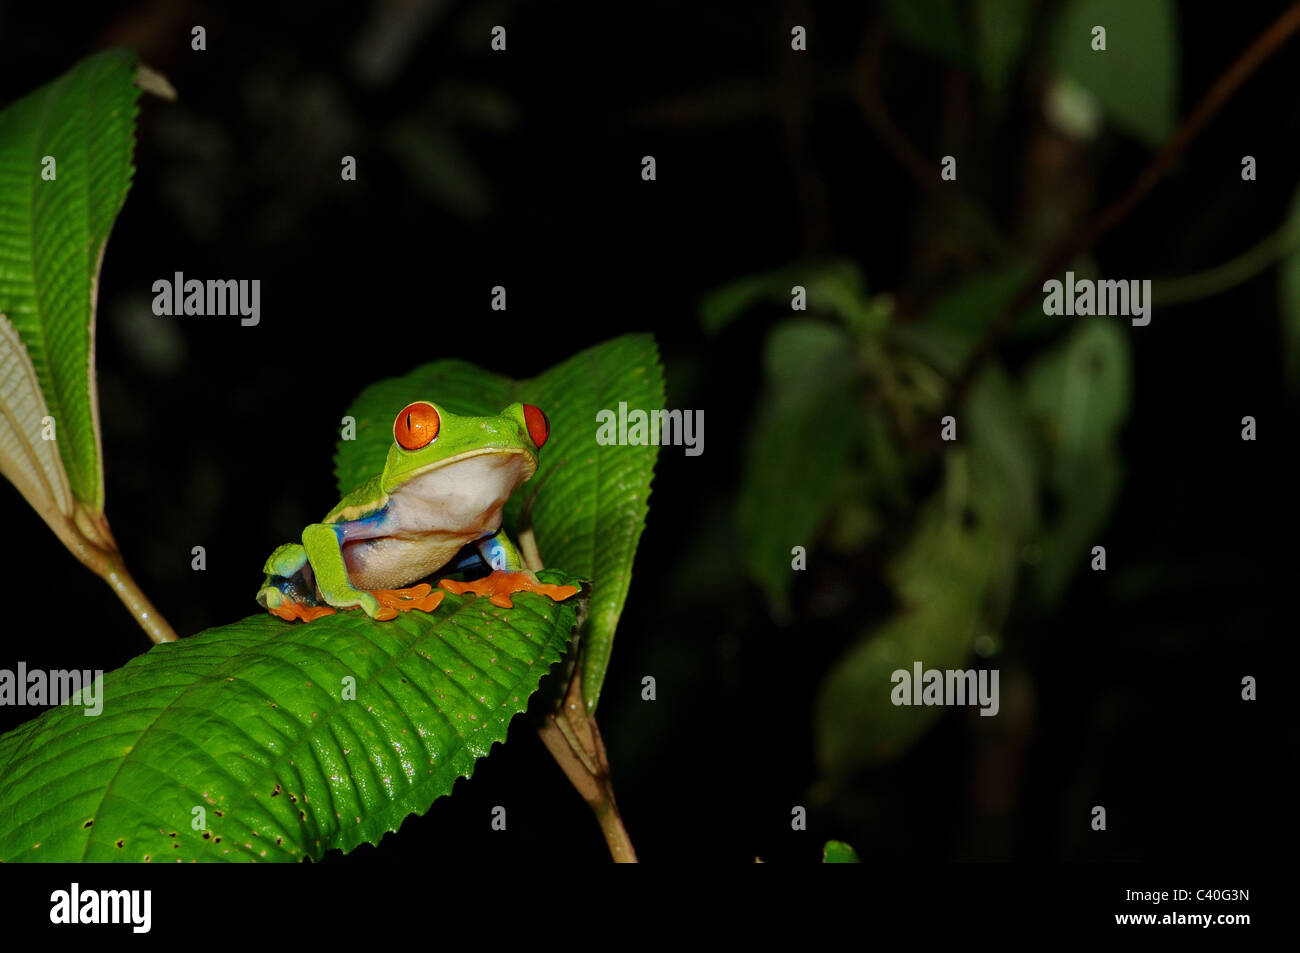 Frog, grenouilles, red-eyed tree frog, agalychnis callidryas, Amphibium, amphibiens, tropical, le Costa Rica, animal, animaux, faune, wil Banque D'Images